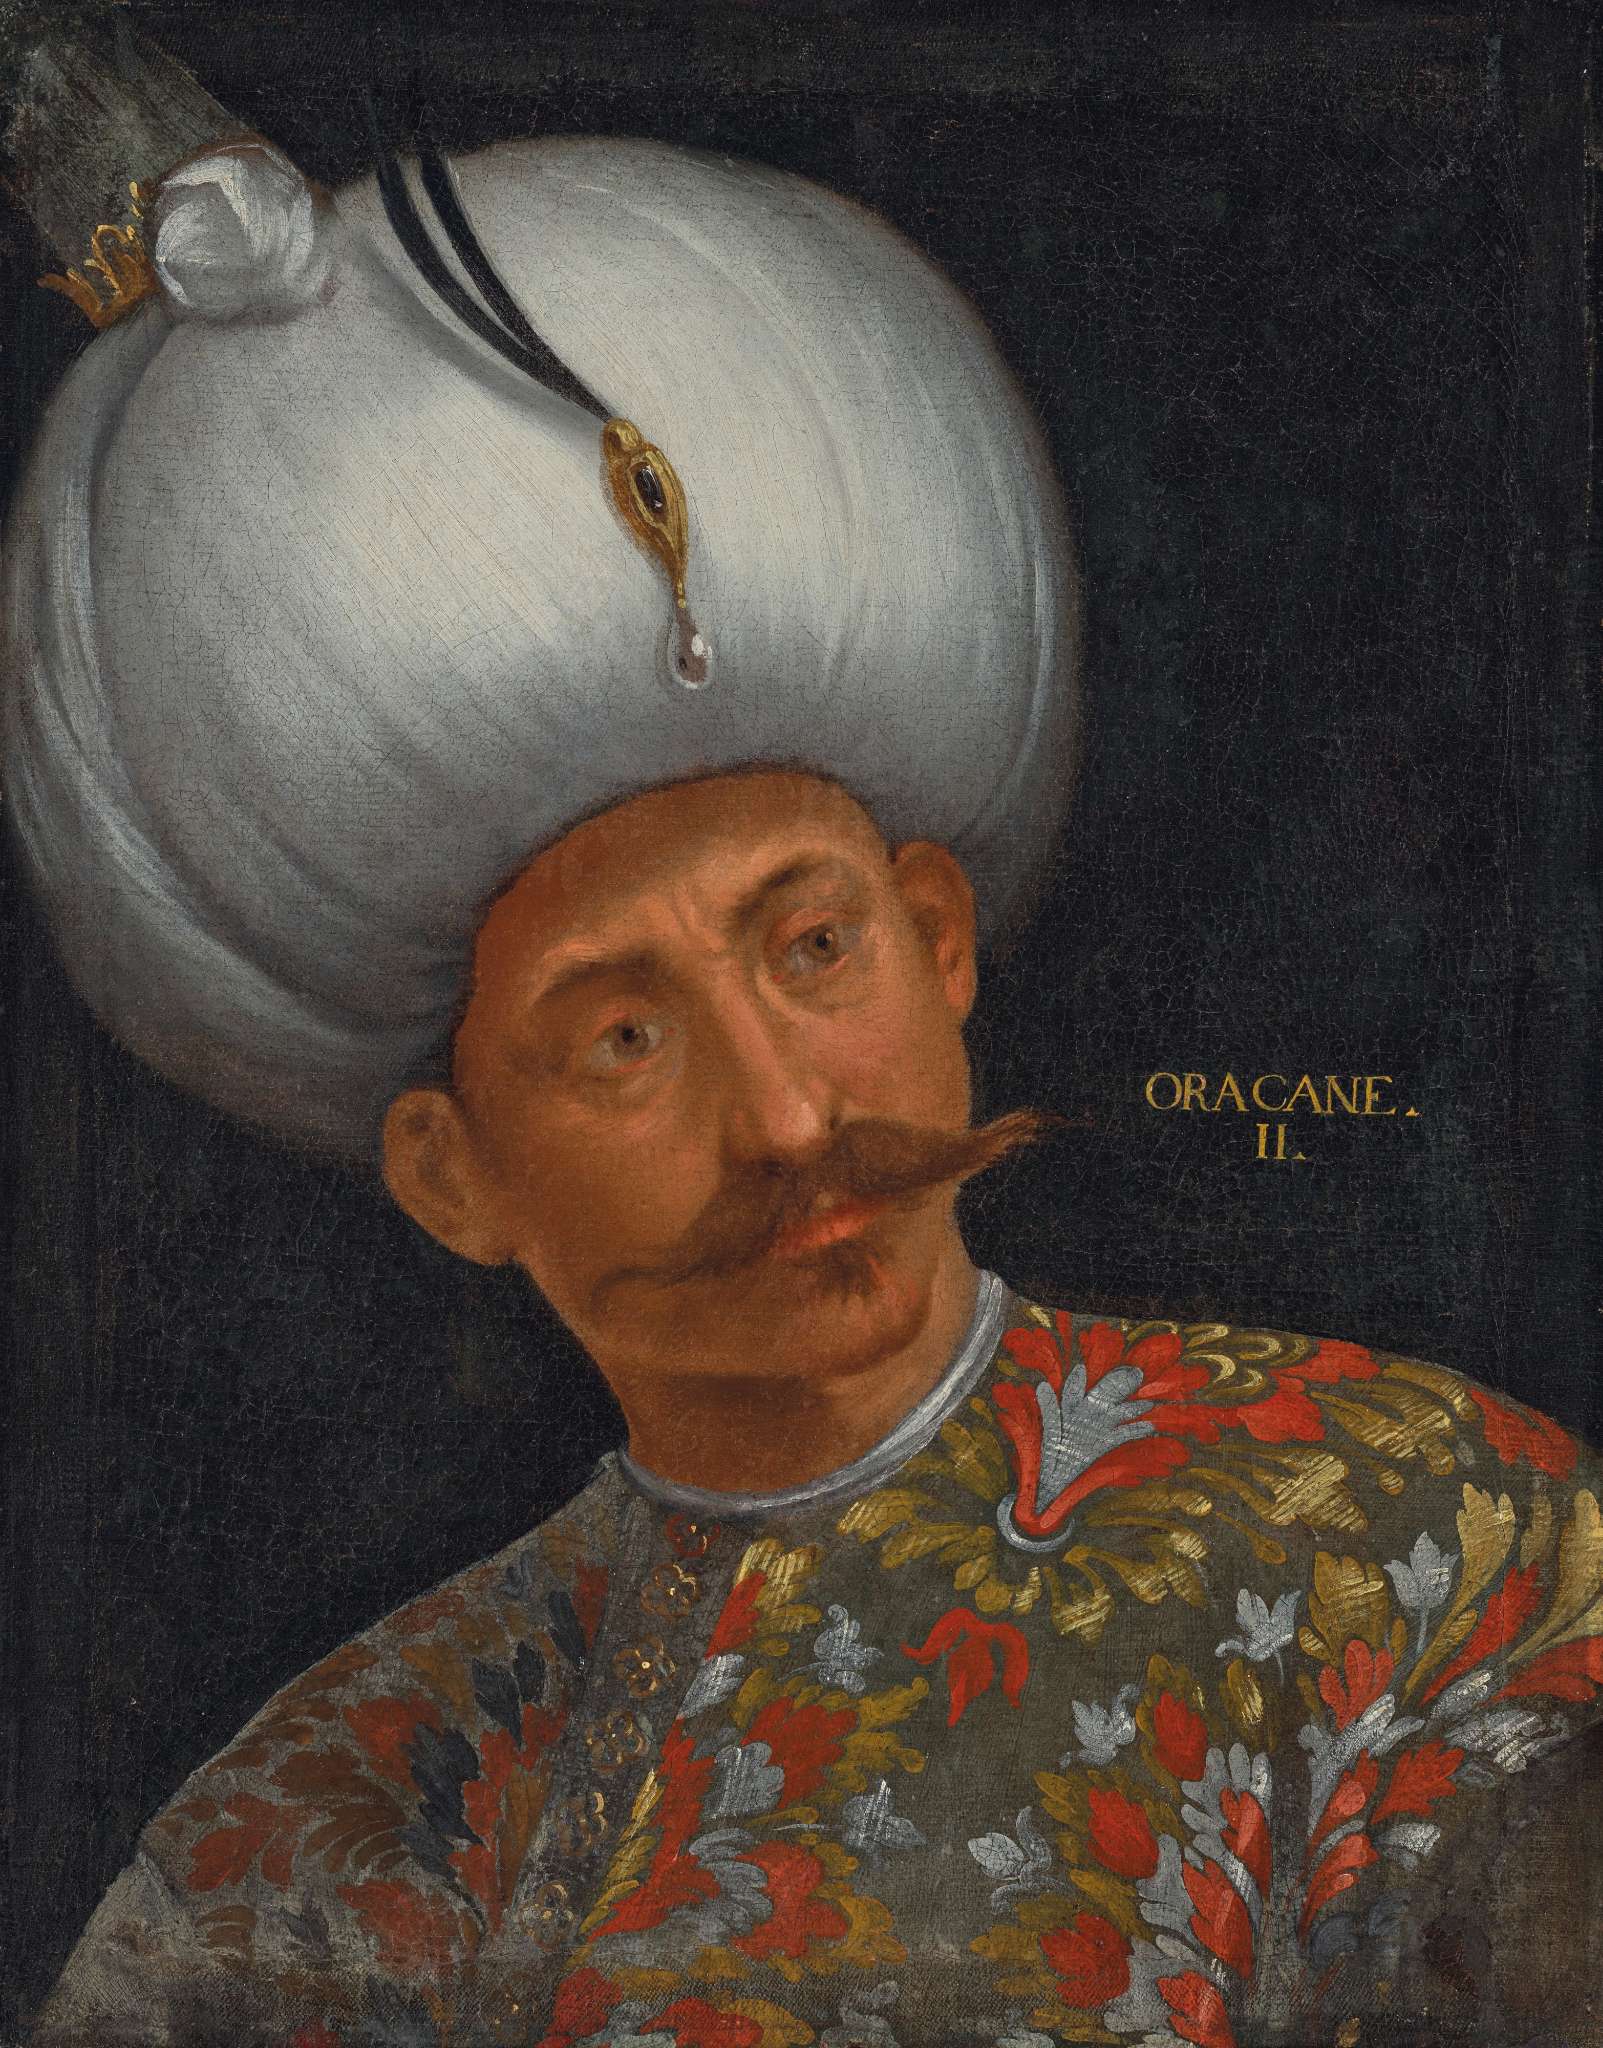 Sultan Orhan, also known as Orhan Gazi (1288-1360) and son of Ottoman founder Osman I, reigned for 36 years and began the Ottoman expansion into the Balkans (Christie’s Images 2021)